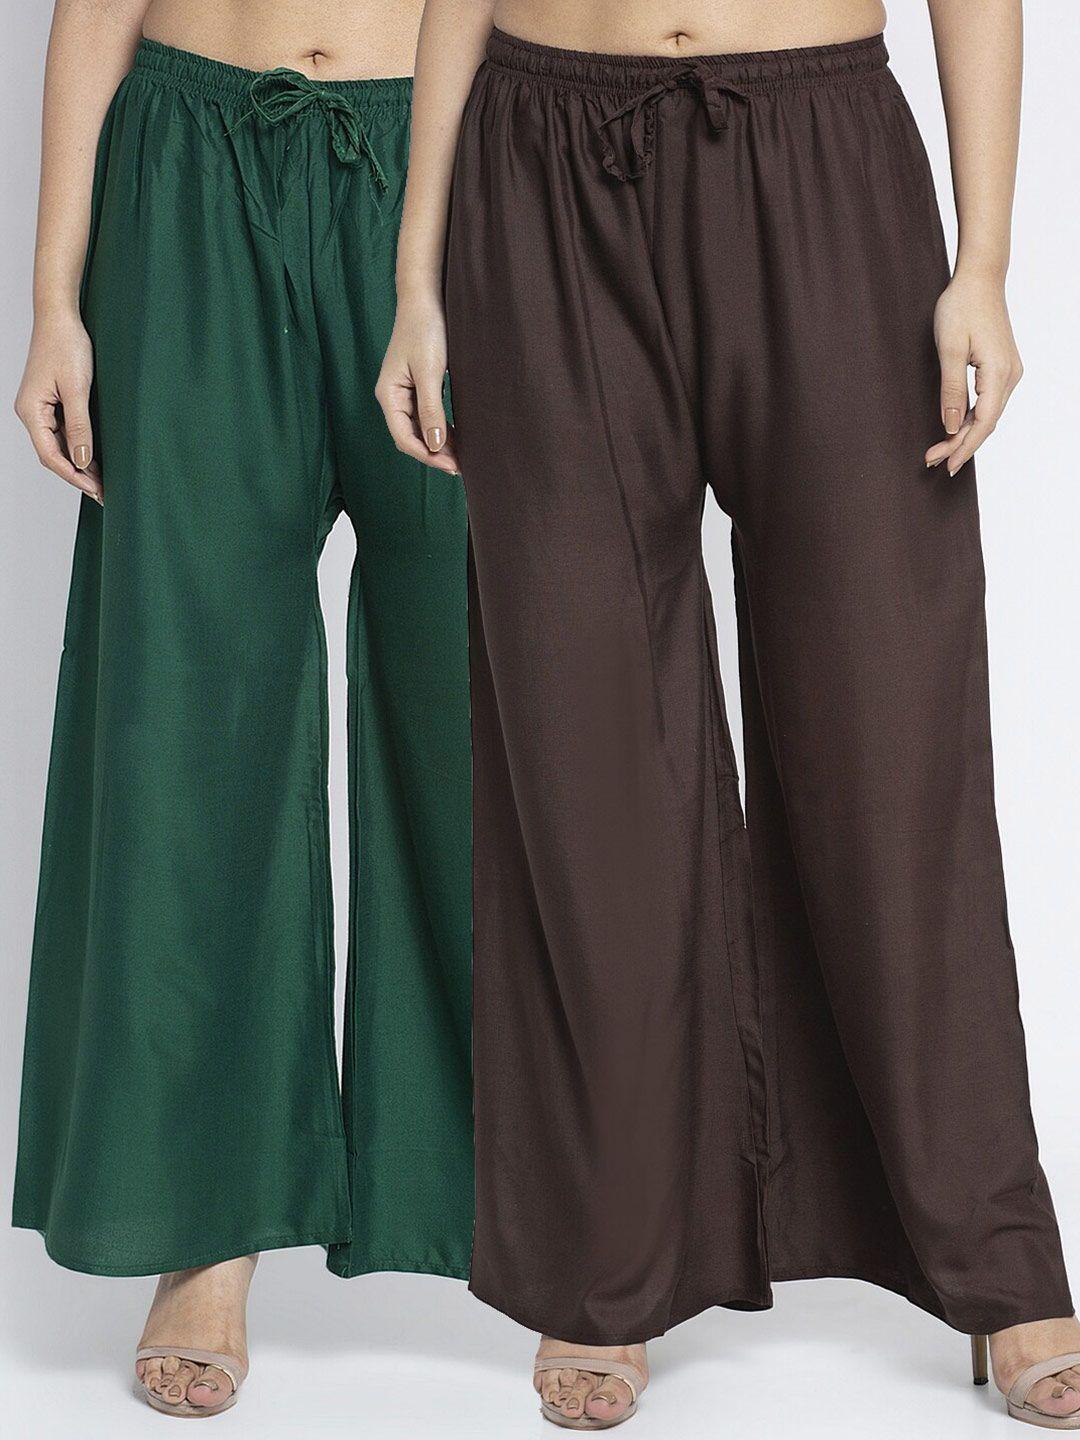 gracit women pack of 2 green & brown ethnic palazzos